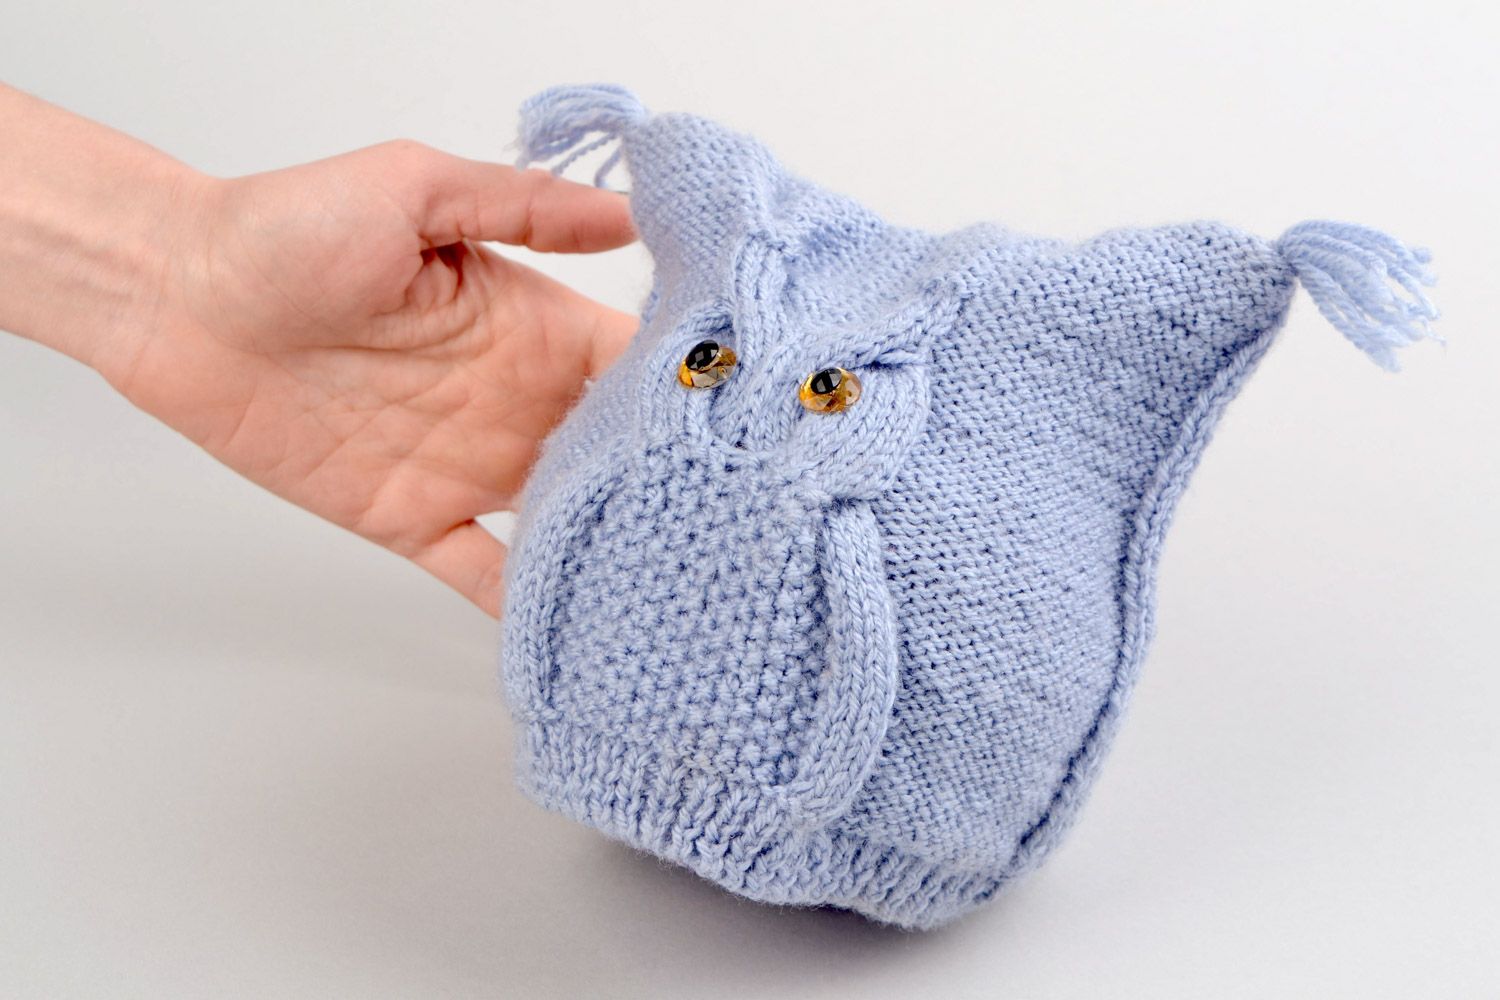 Rectangular handmade blue knitted hat for baby with owl pattern made of acrylic yarns photo 2